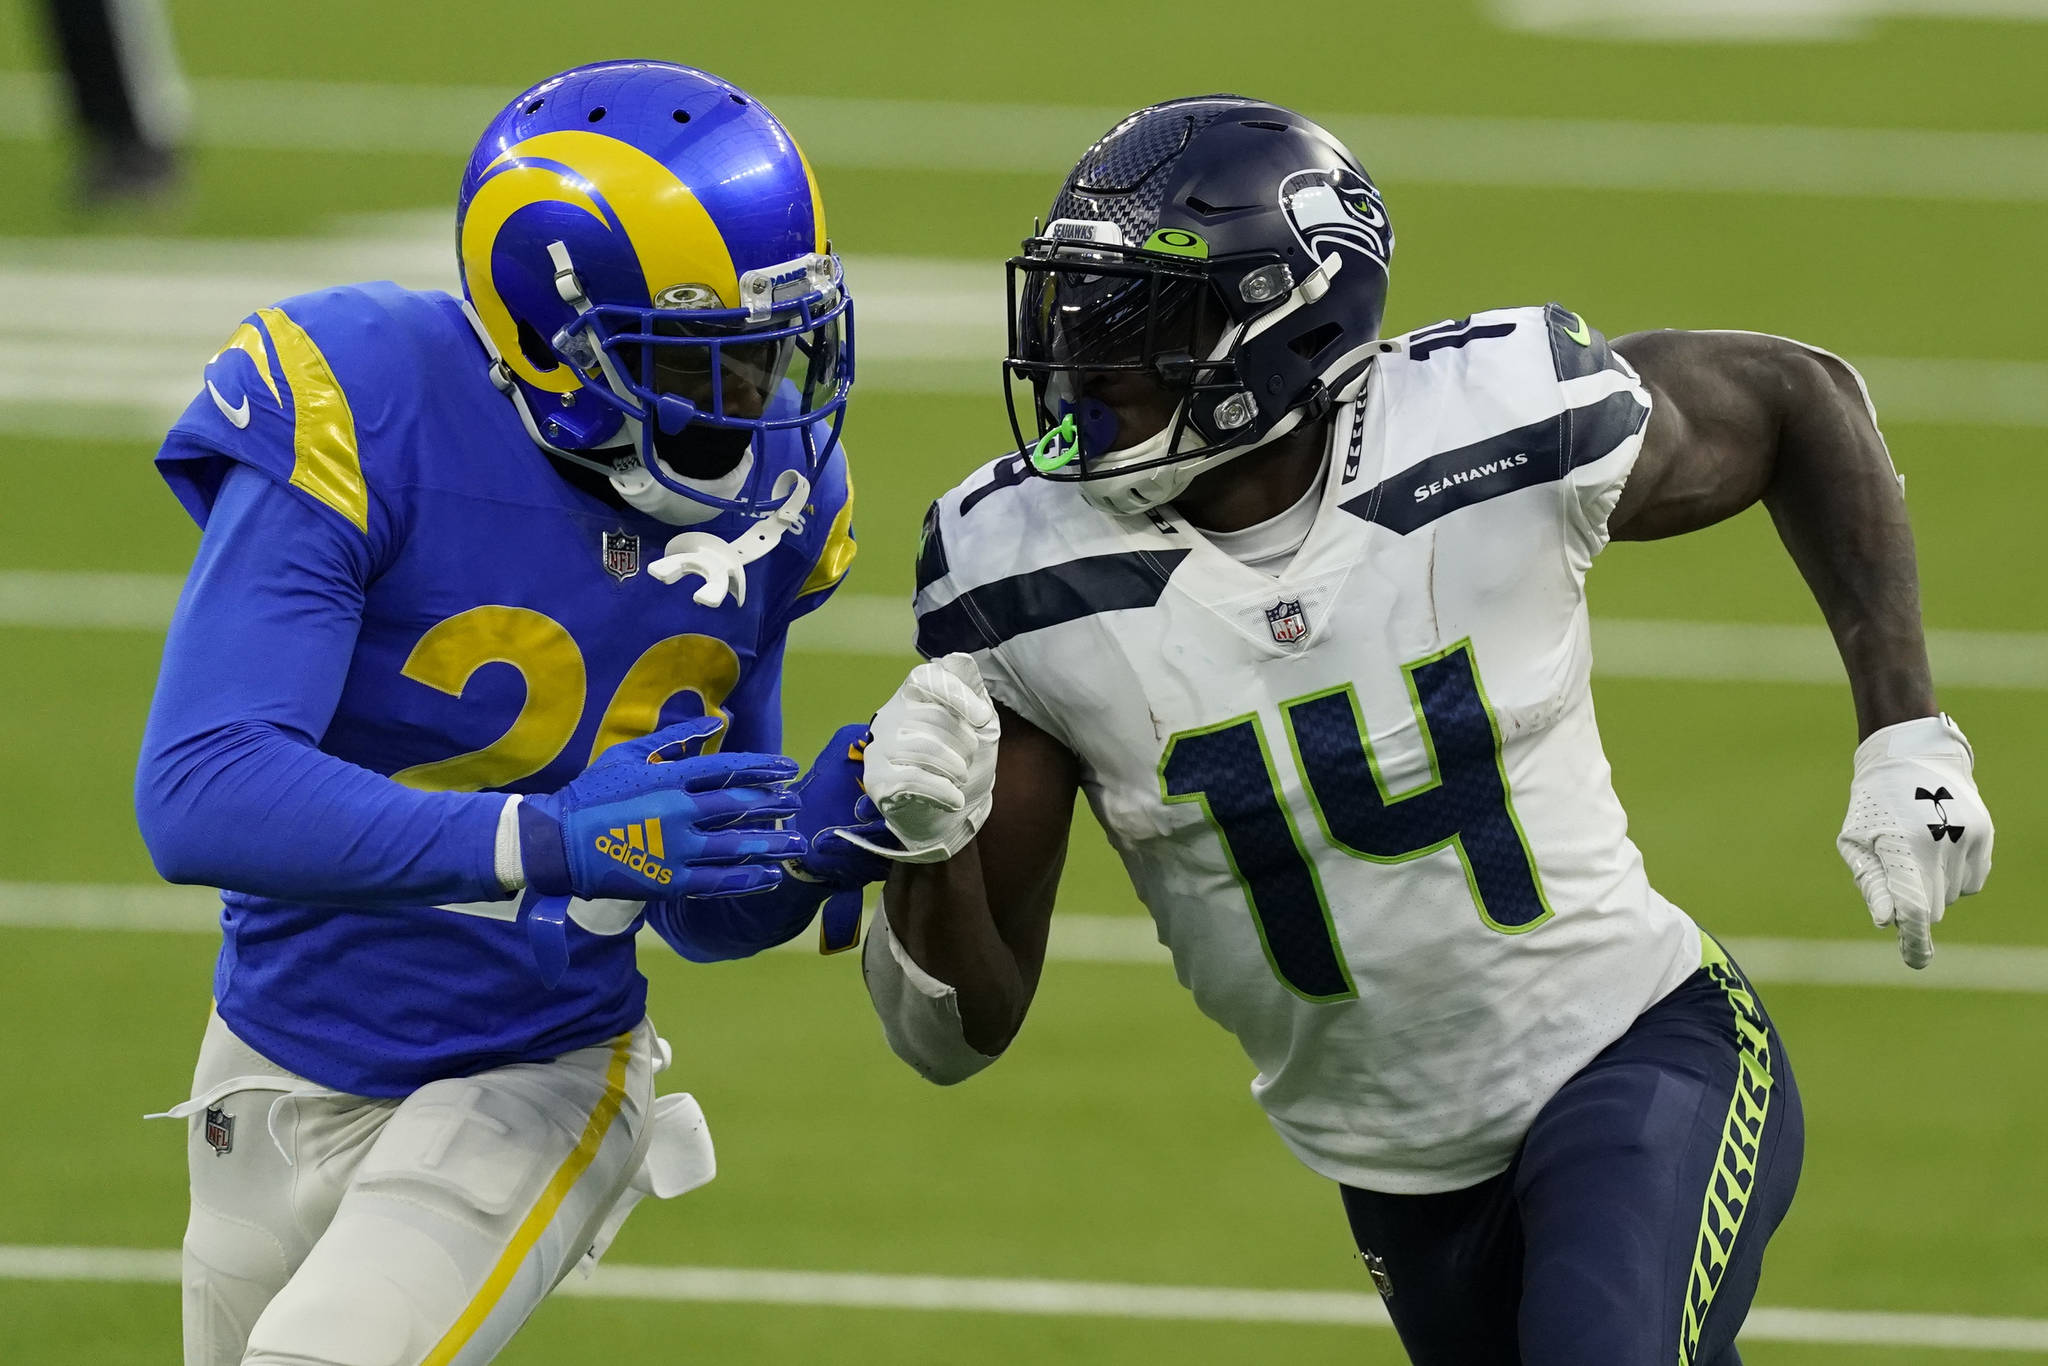 Seattle Seahawks wide receiver DK Metcalf (14) is defended by Los Angeles Rams cornerback Jalen Ramsey (20) during the the Rams’ 23-16 victory on Nov. 15 at SoFi Stadium. (AP Photo/Ashley Landis)